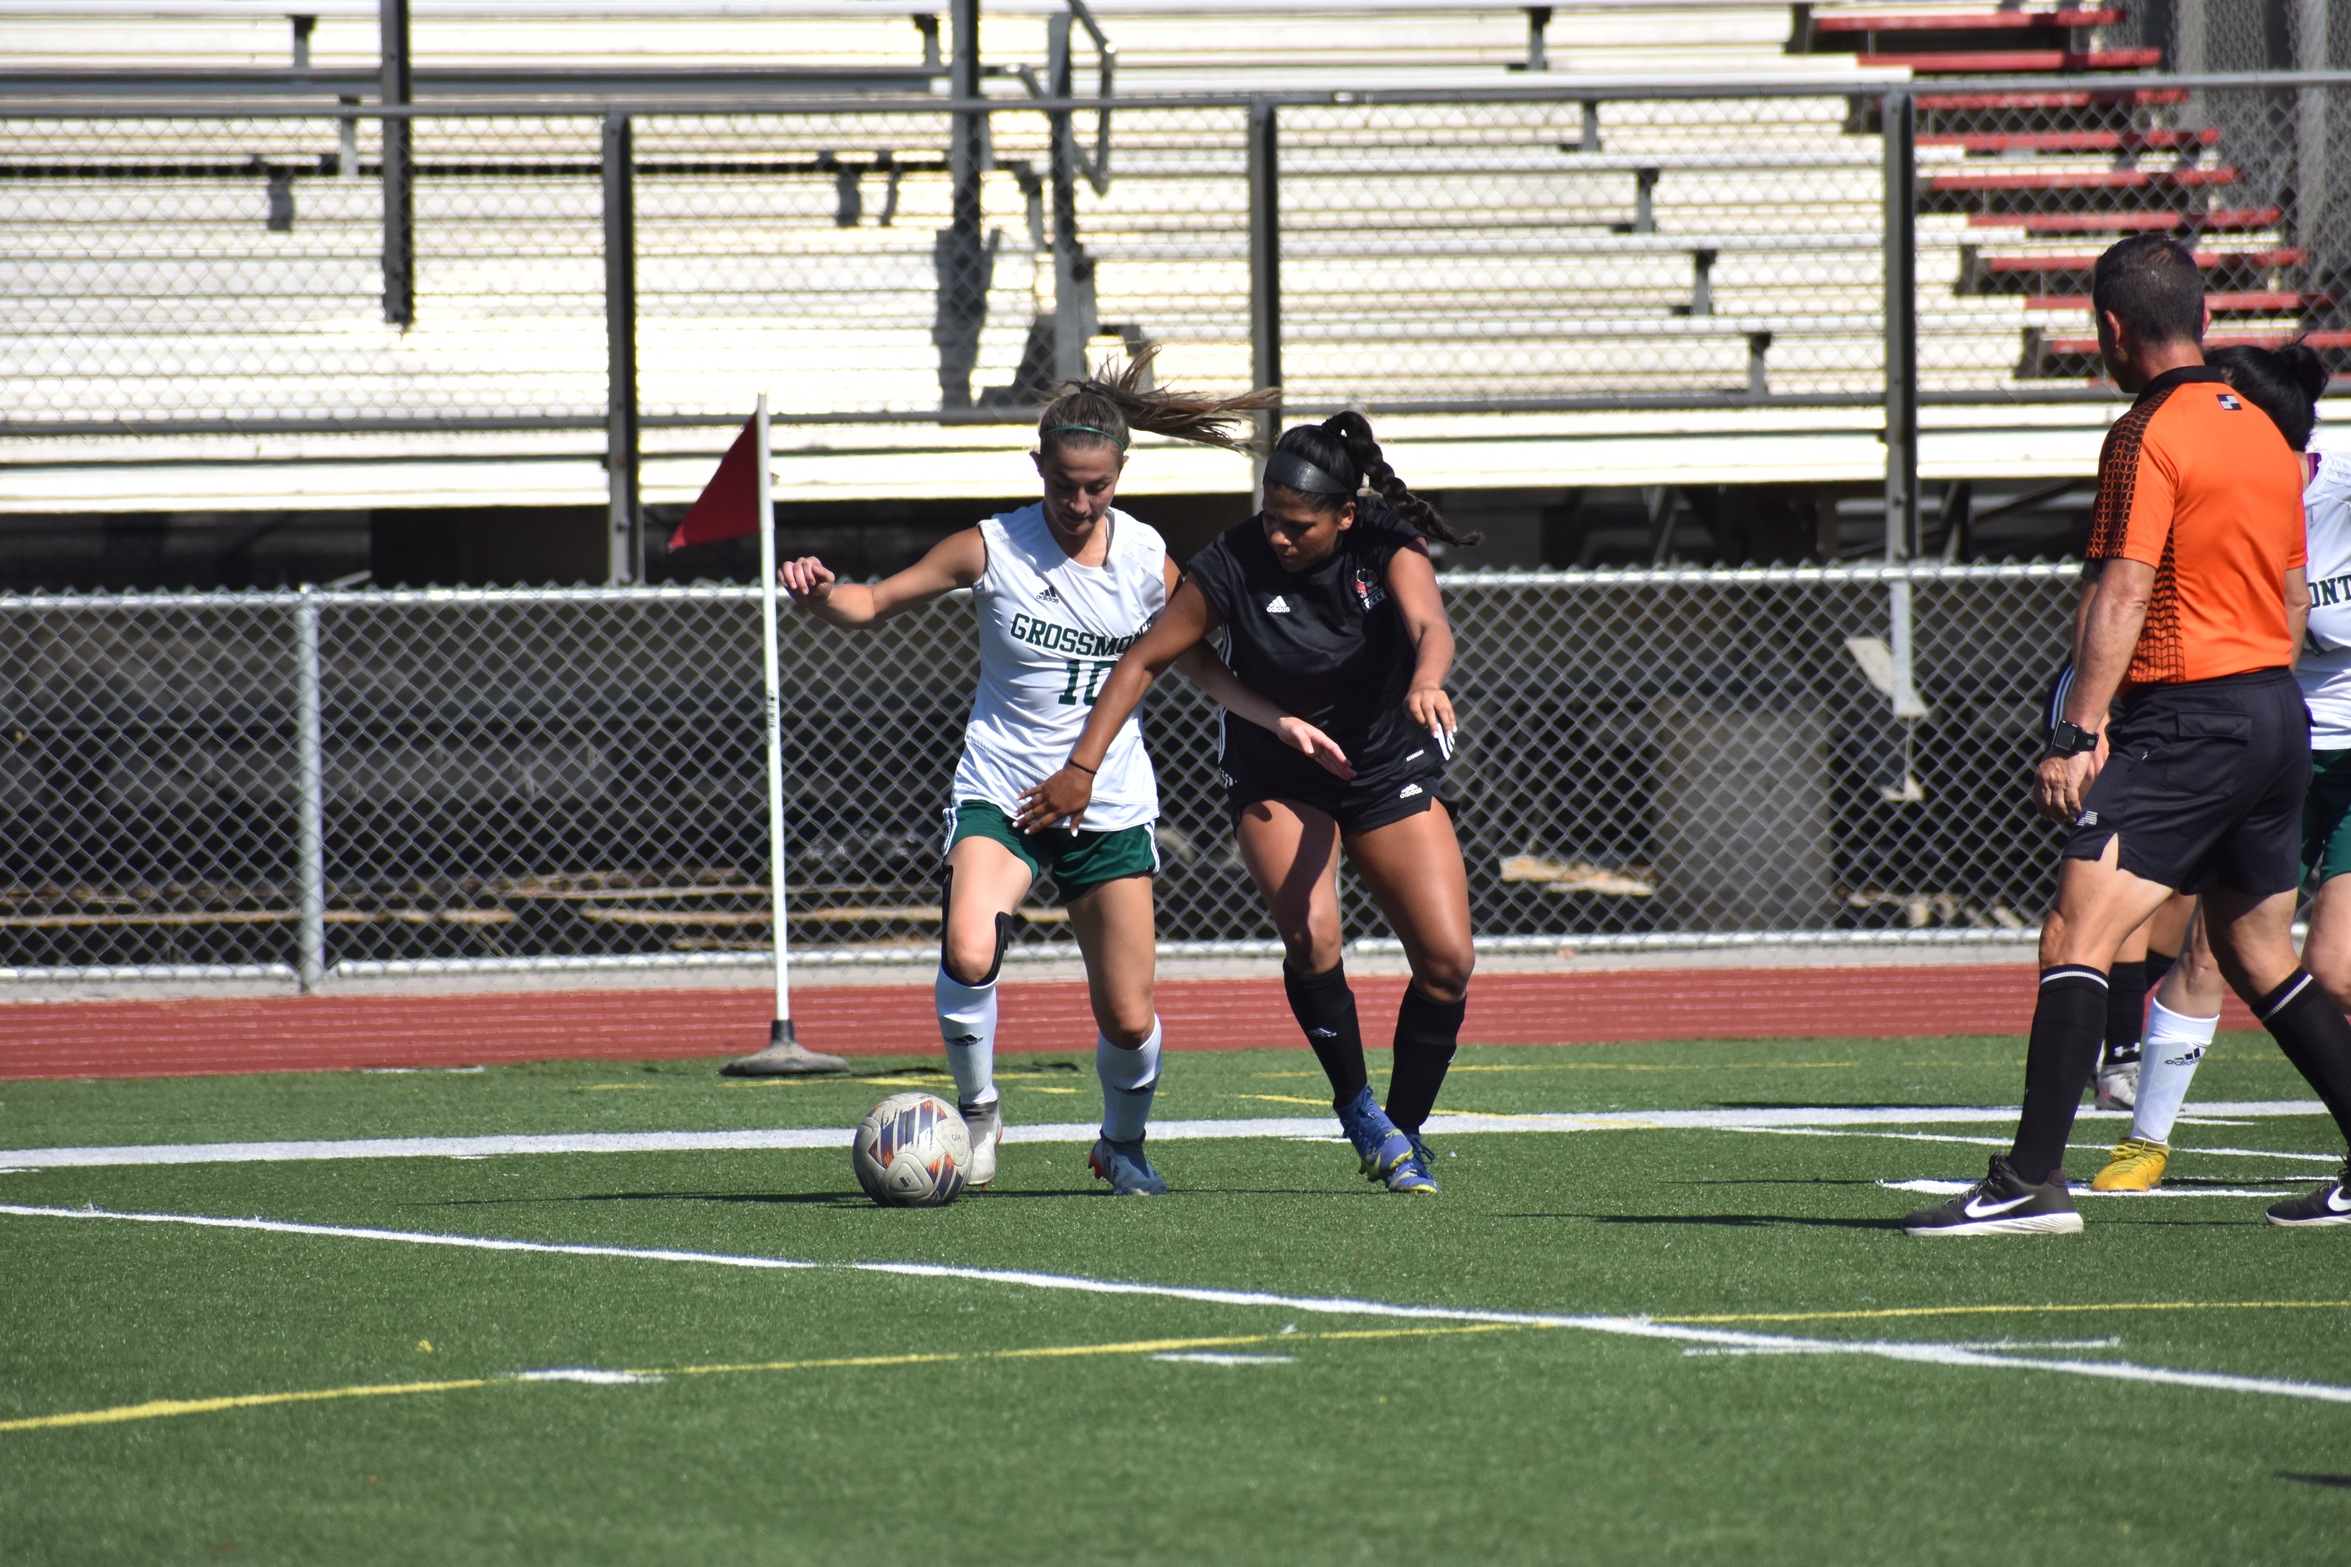 Jesseka Staton with a touch against MSJC.